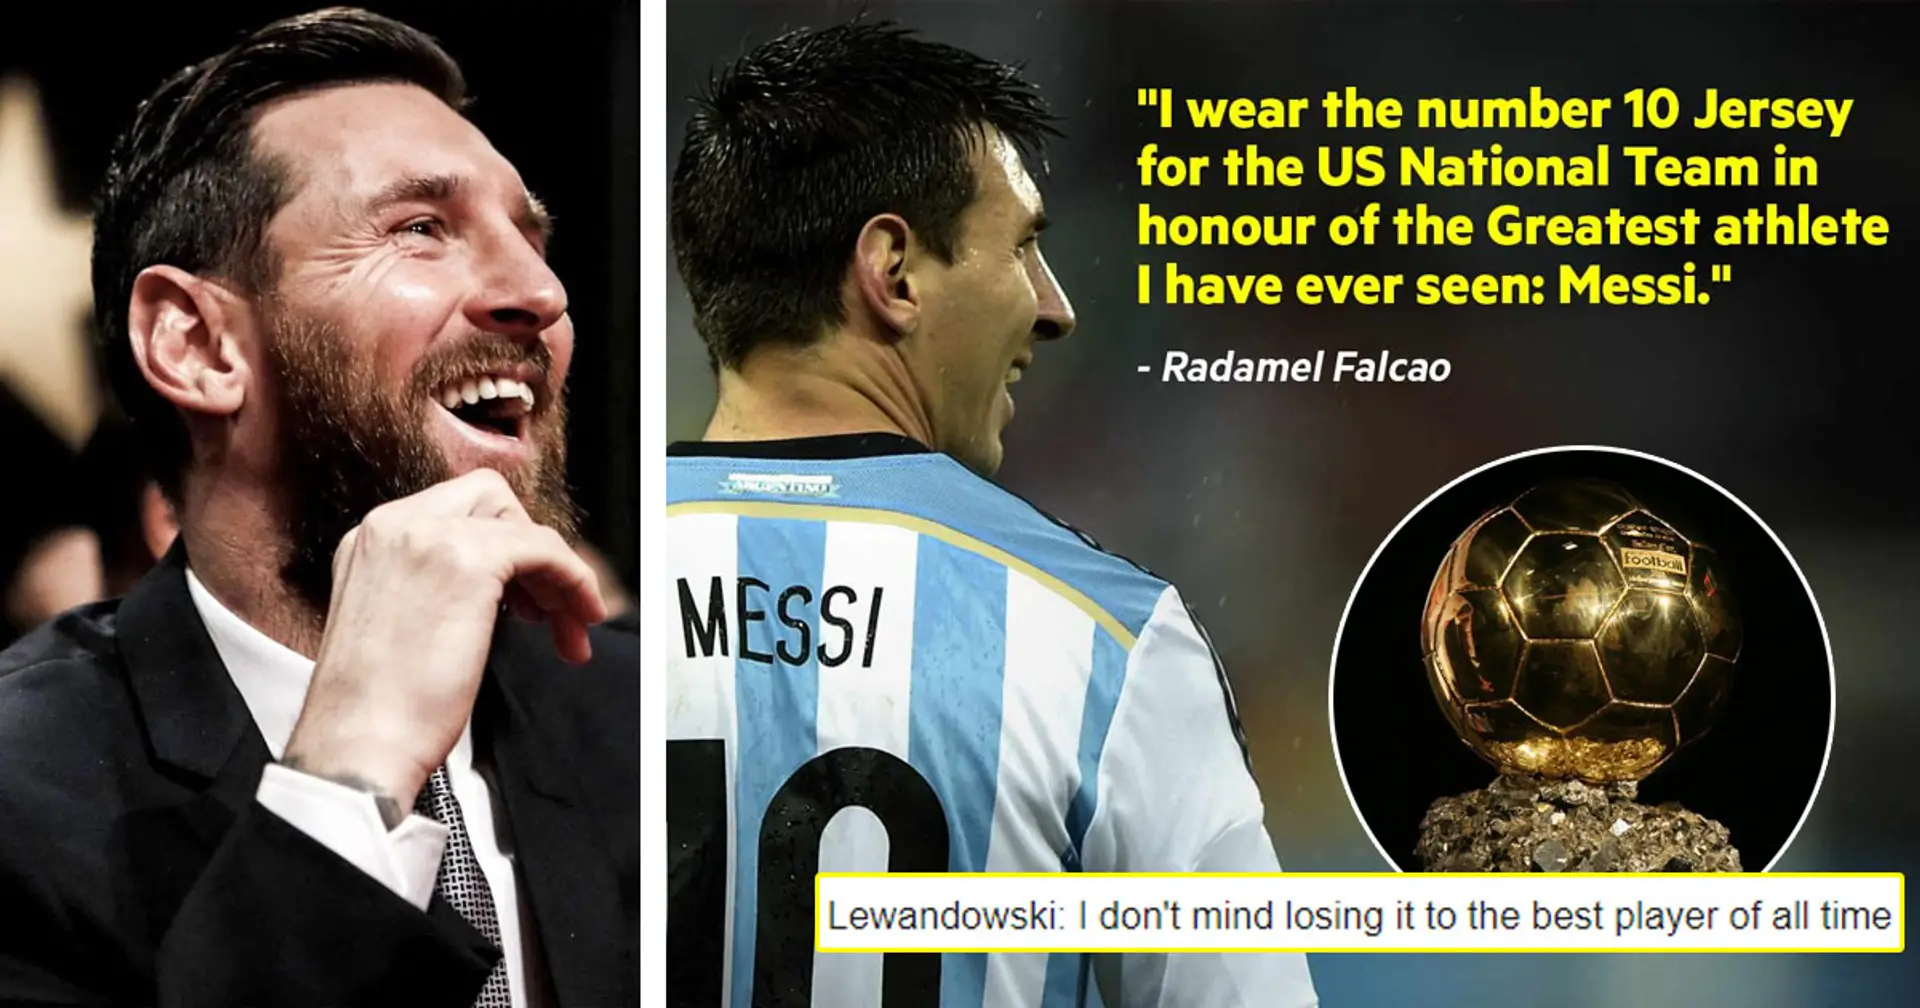 Lewandowski ready to lose Ballon d'Or to Messi and 4 more fake quotes about Leo we wish were true